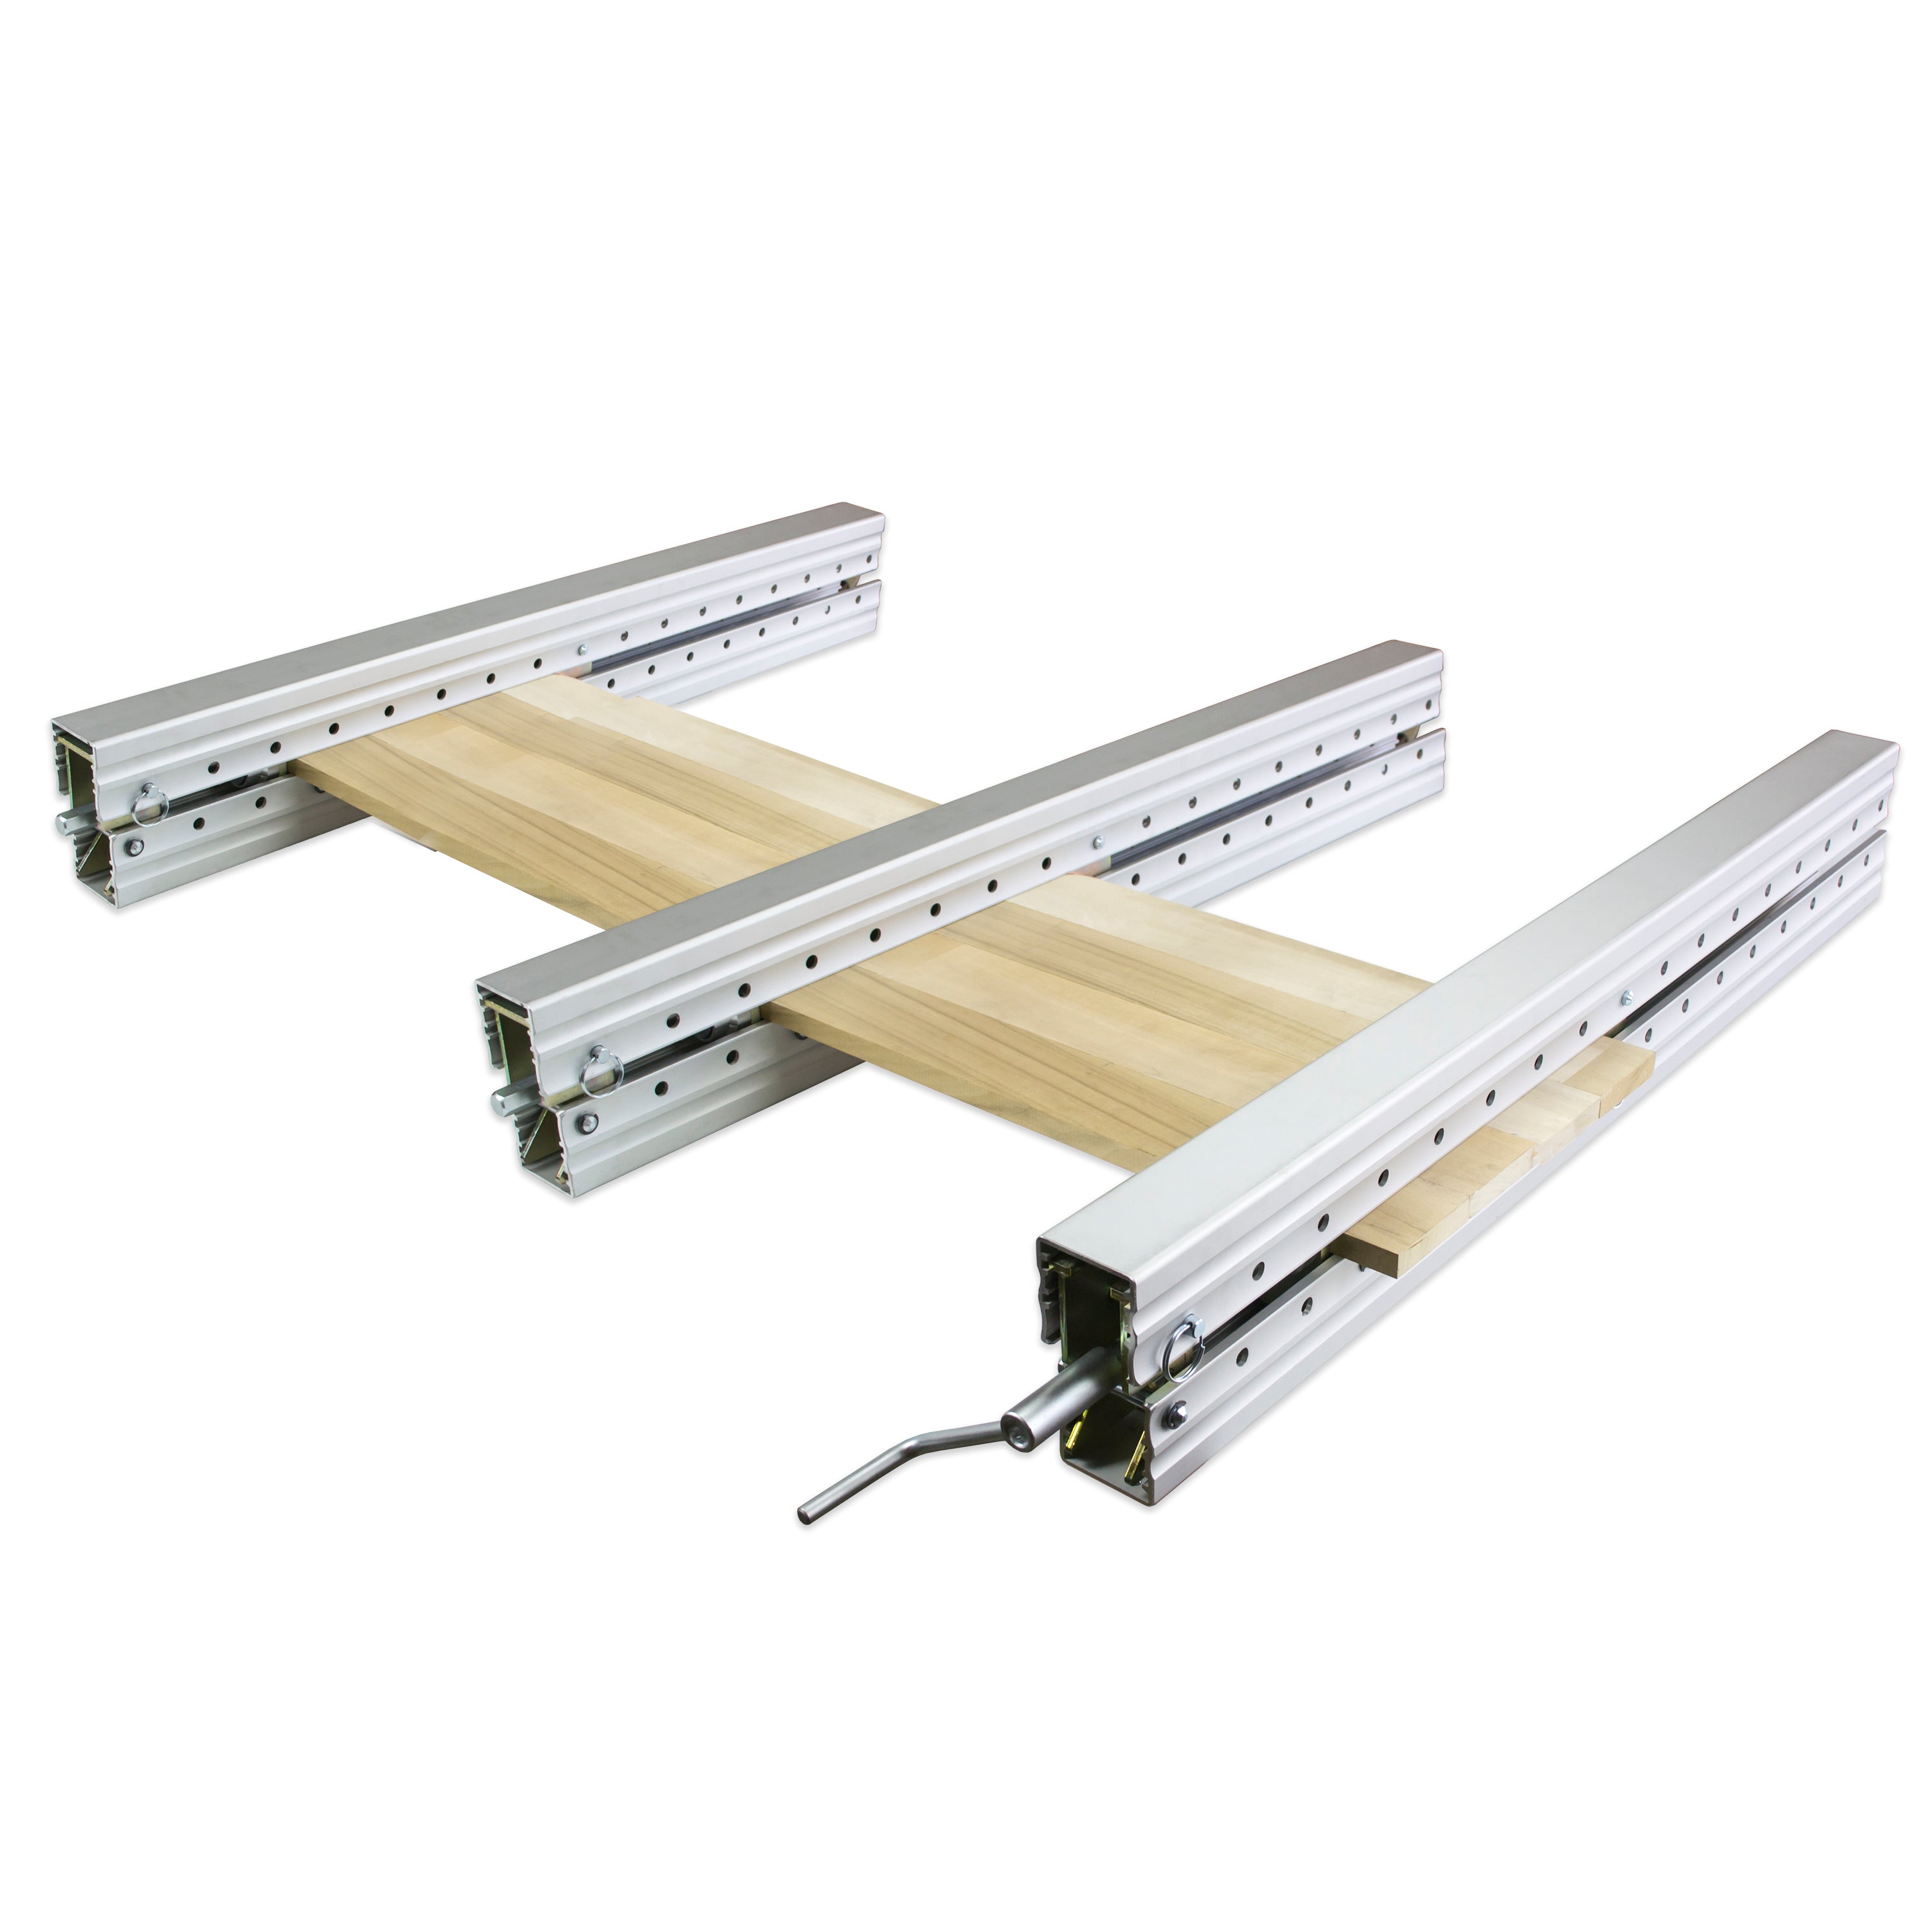 Frontline Wood Clamp System - Flatten & Clamp in One Action (1220mm/48inch) (3 Clamps)